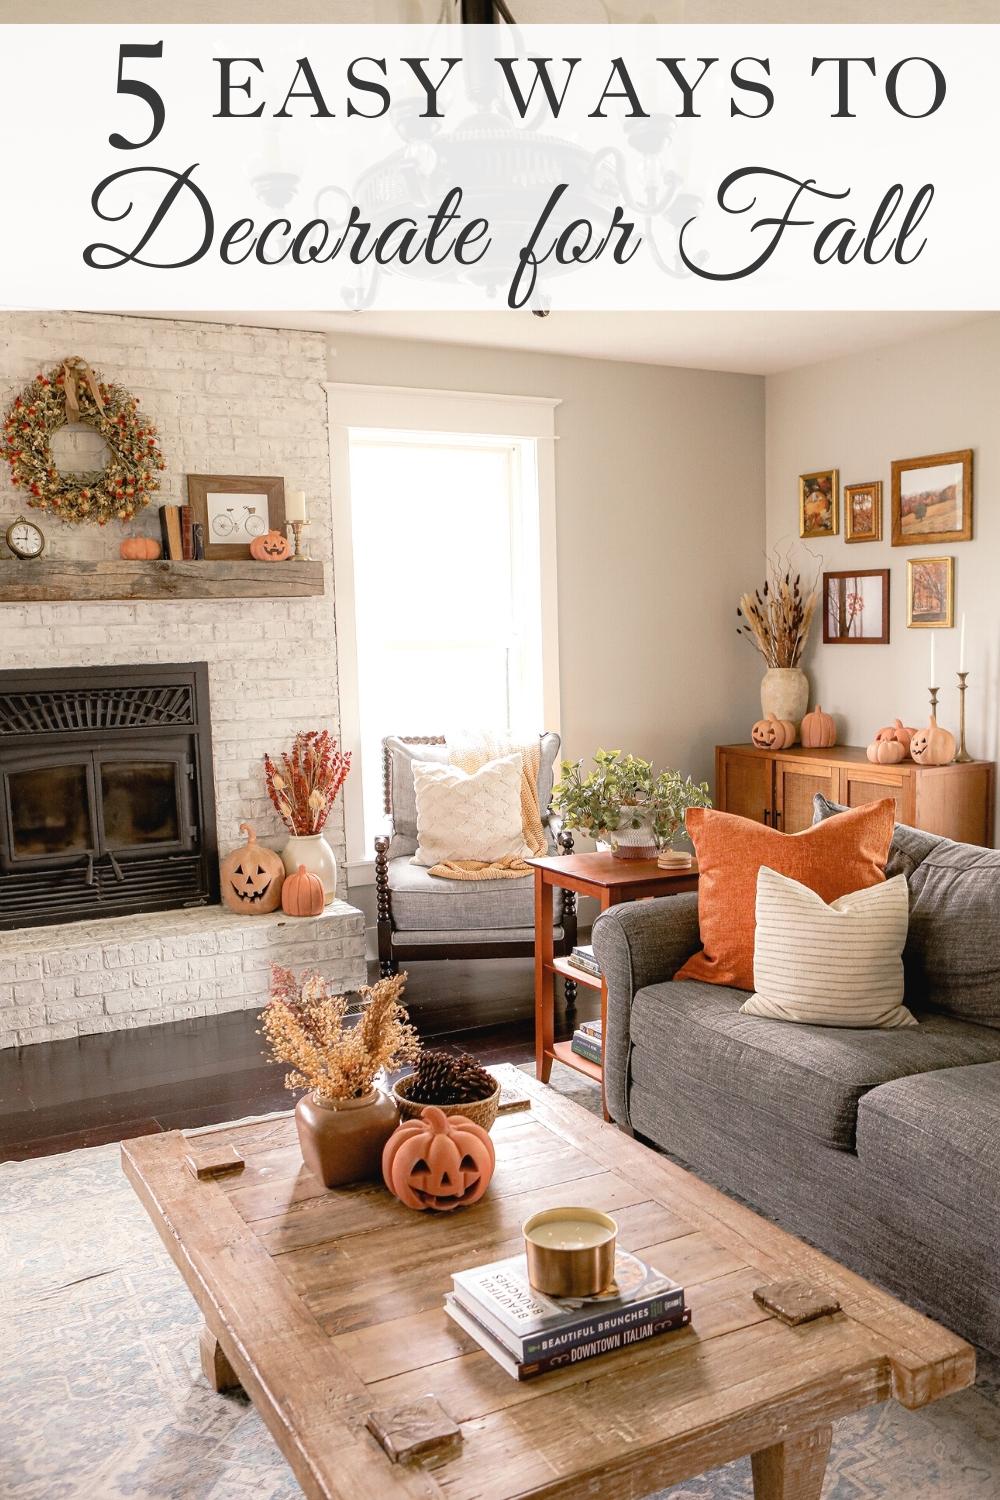 5 easy ideas for decorating for fall